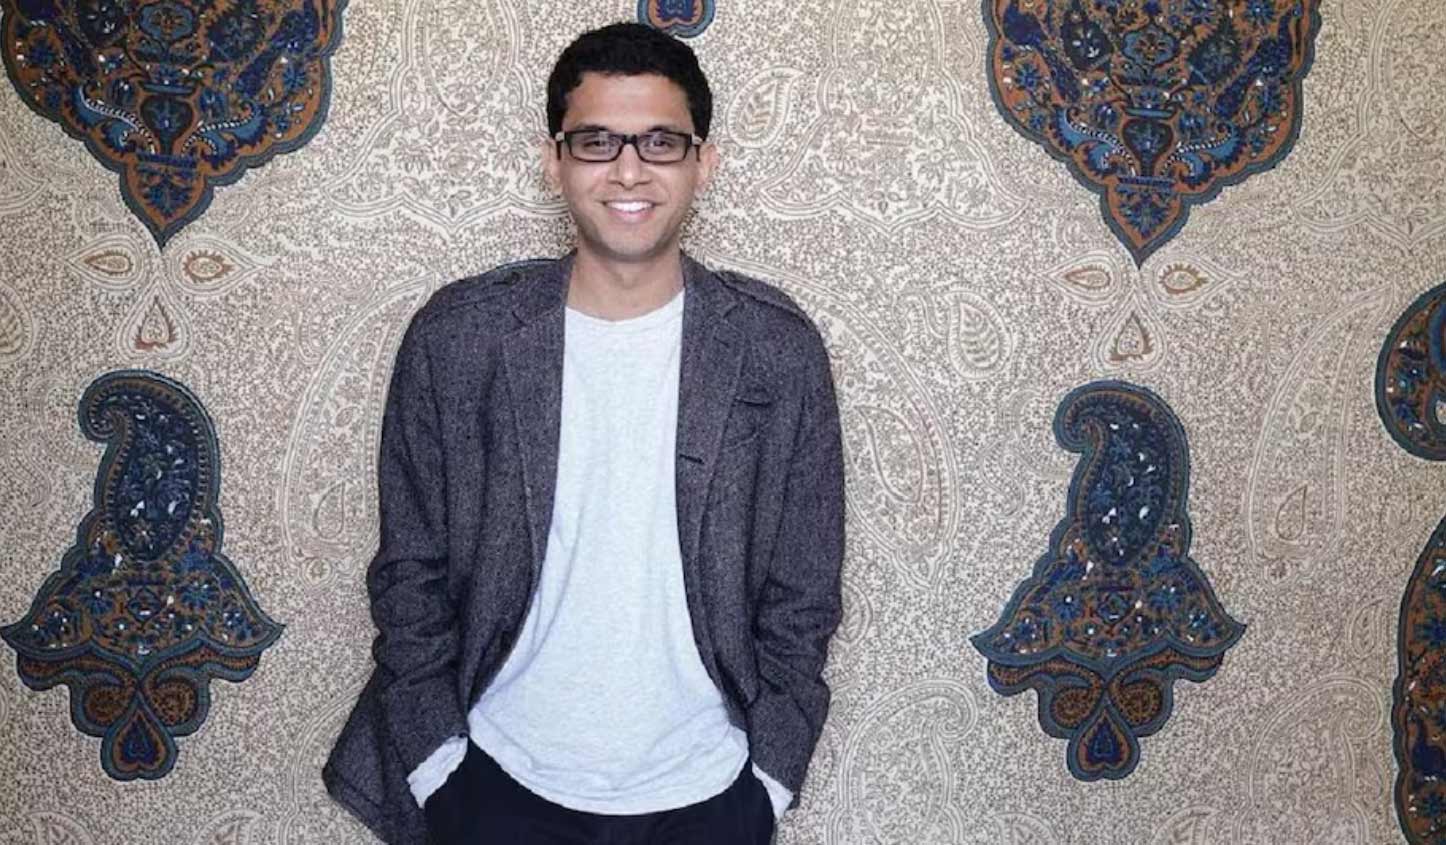 Happiest Minds teams up with Rohan Murty's AI firm Soroco